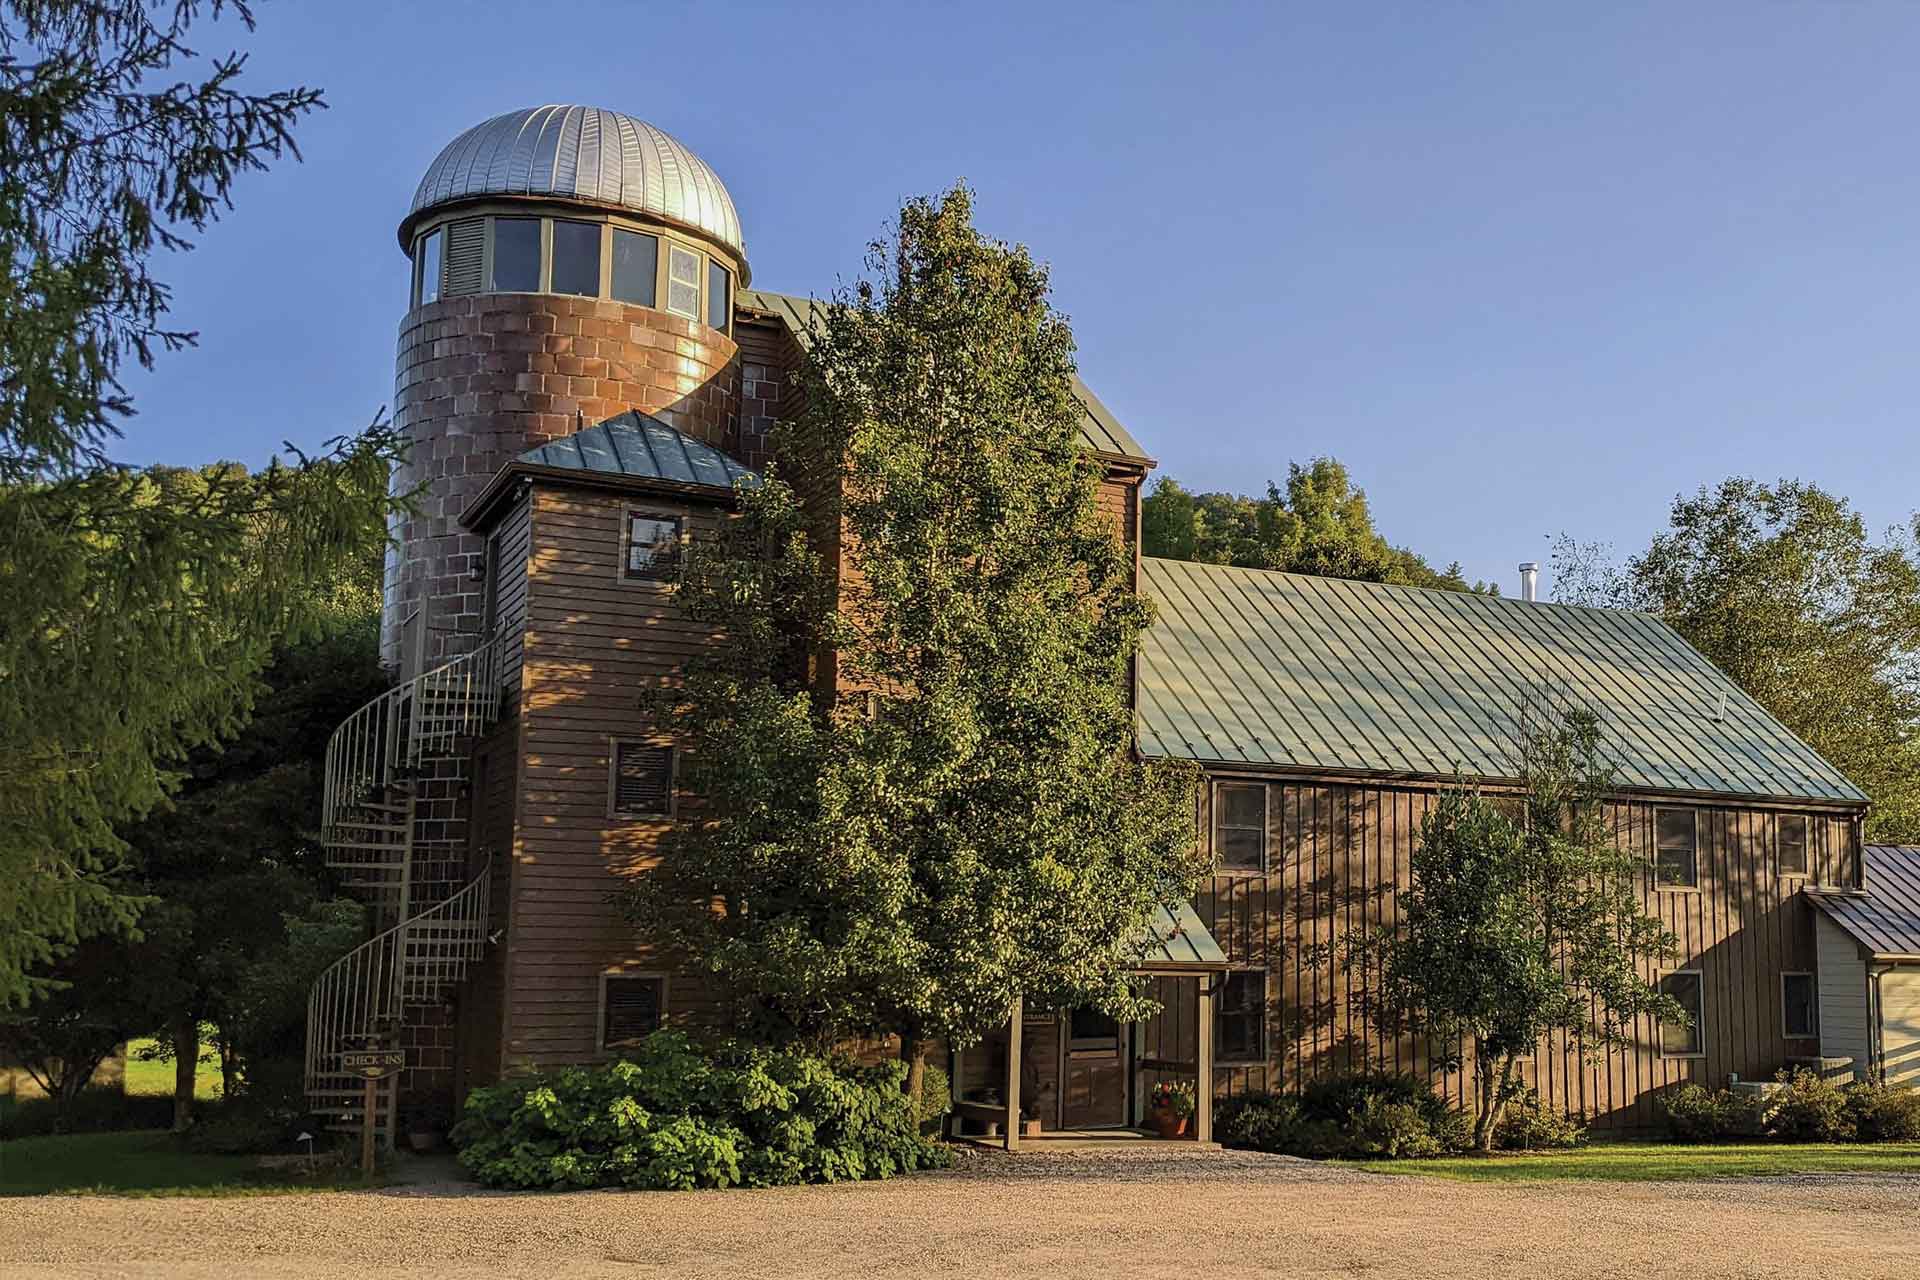 A rustic brown barn with a tall silo